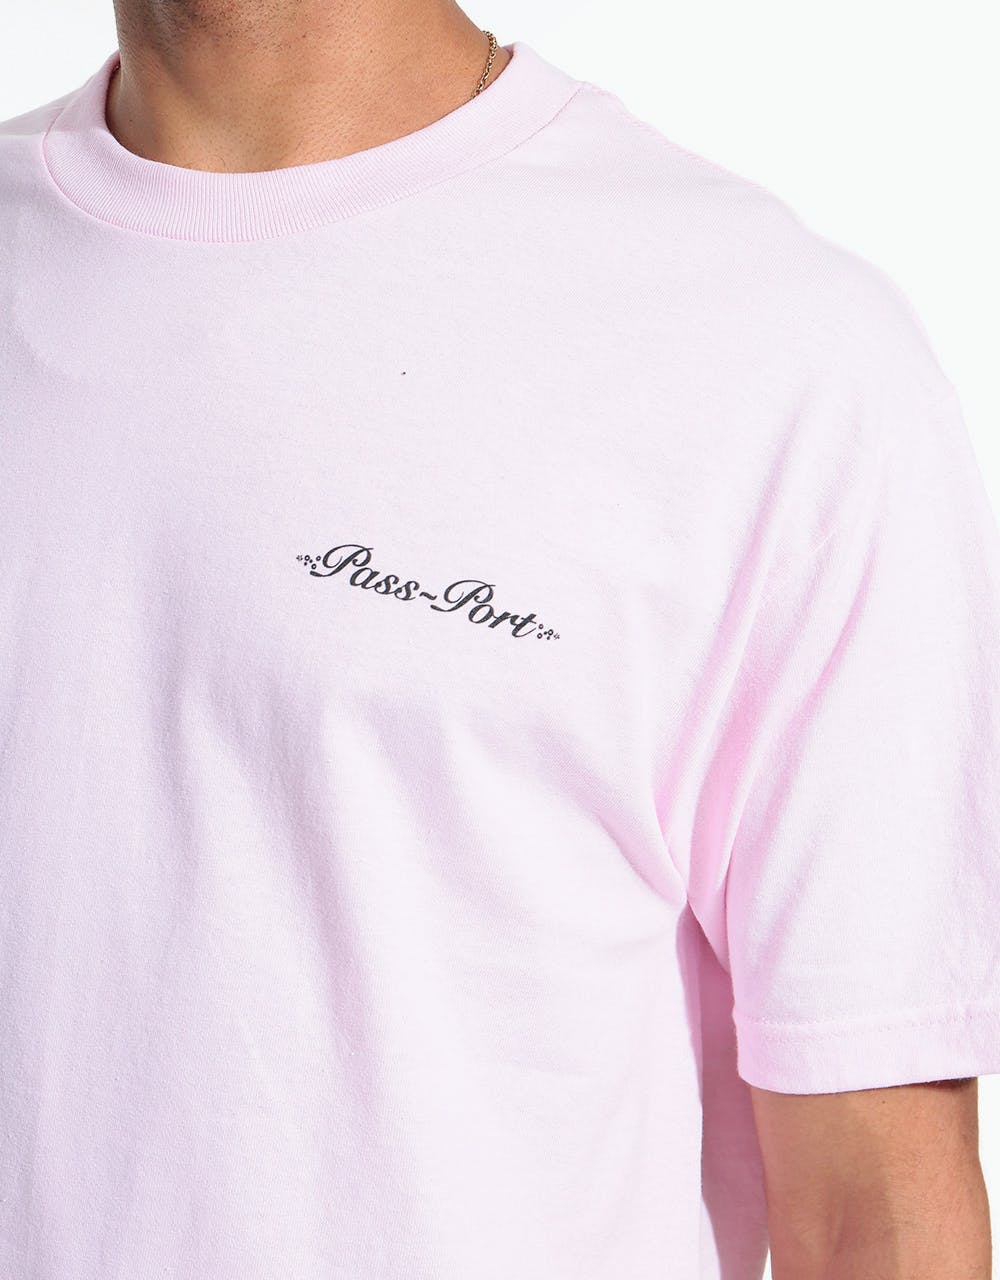 Pass Port Champers T-Shirt - Pink